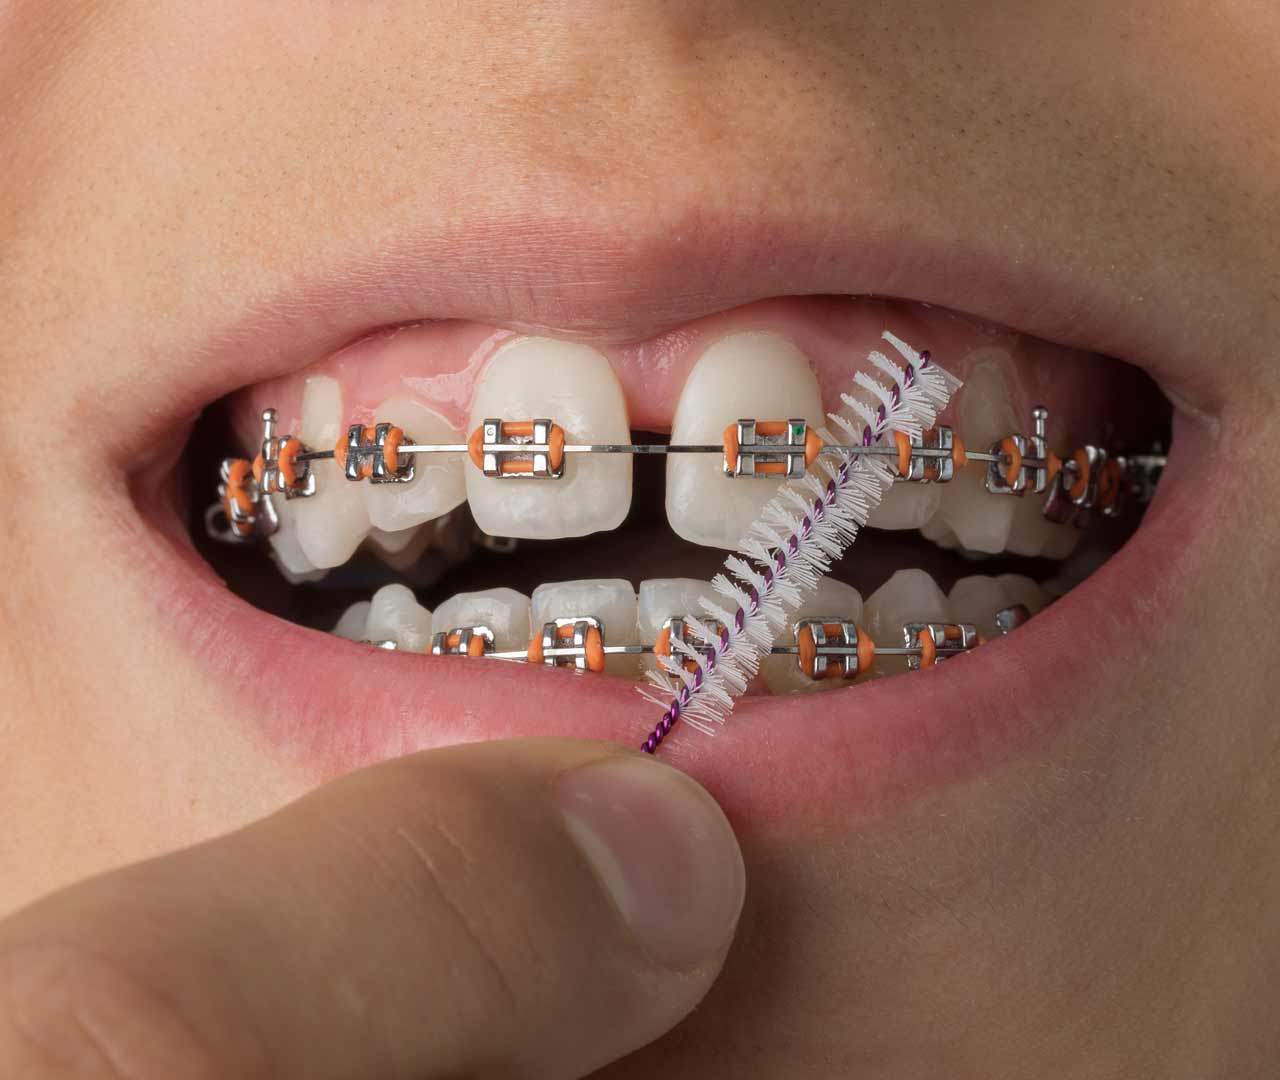 How to take care of your braces?